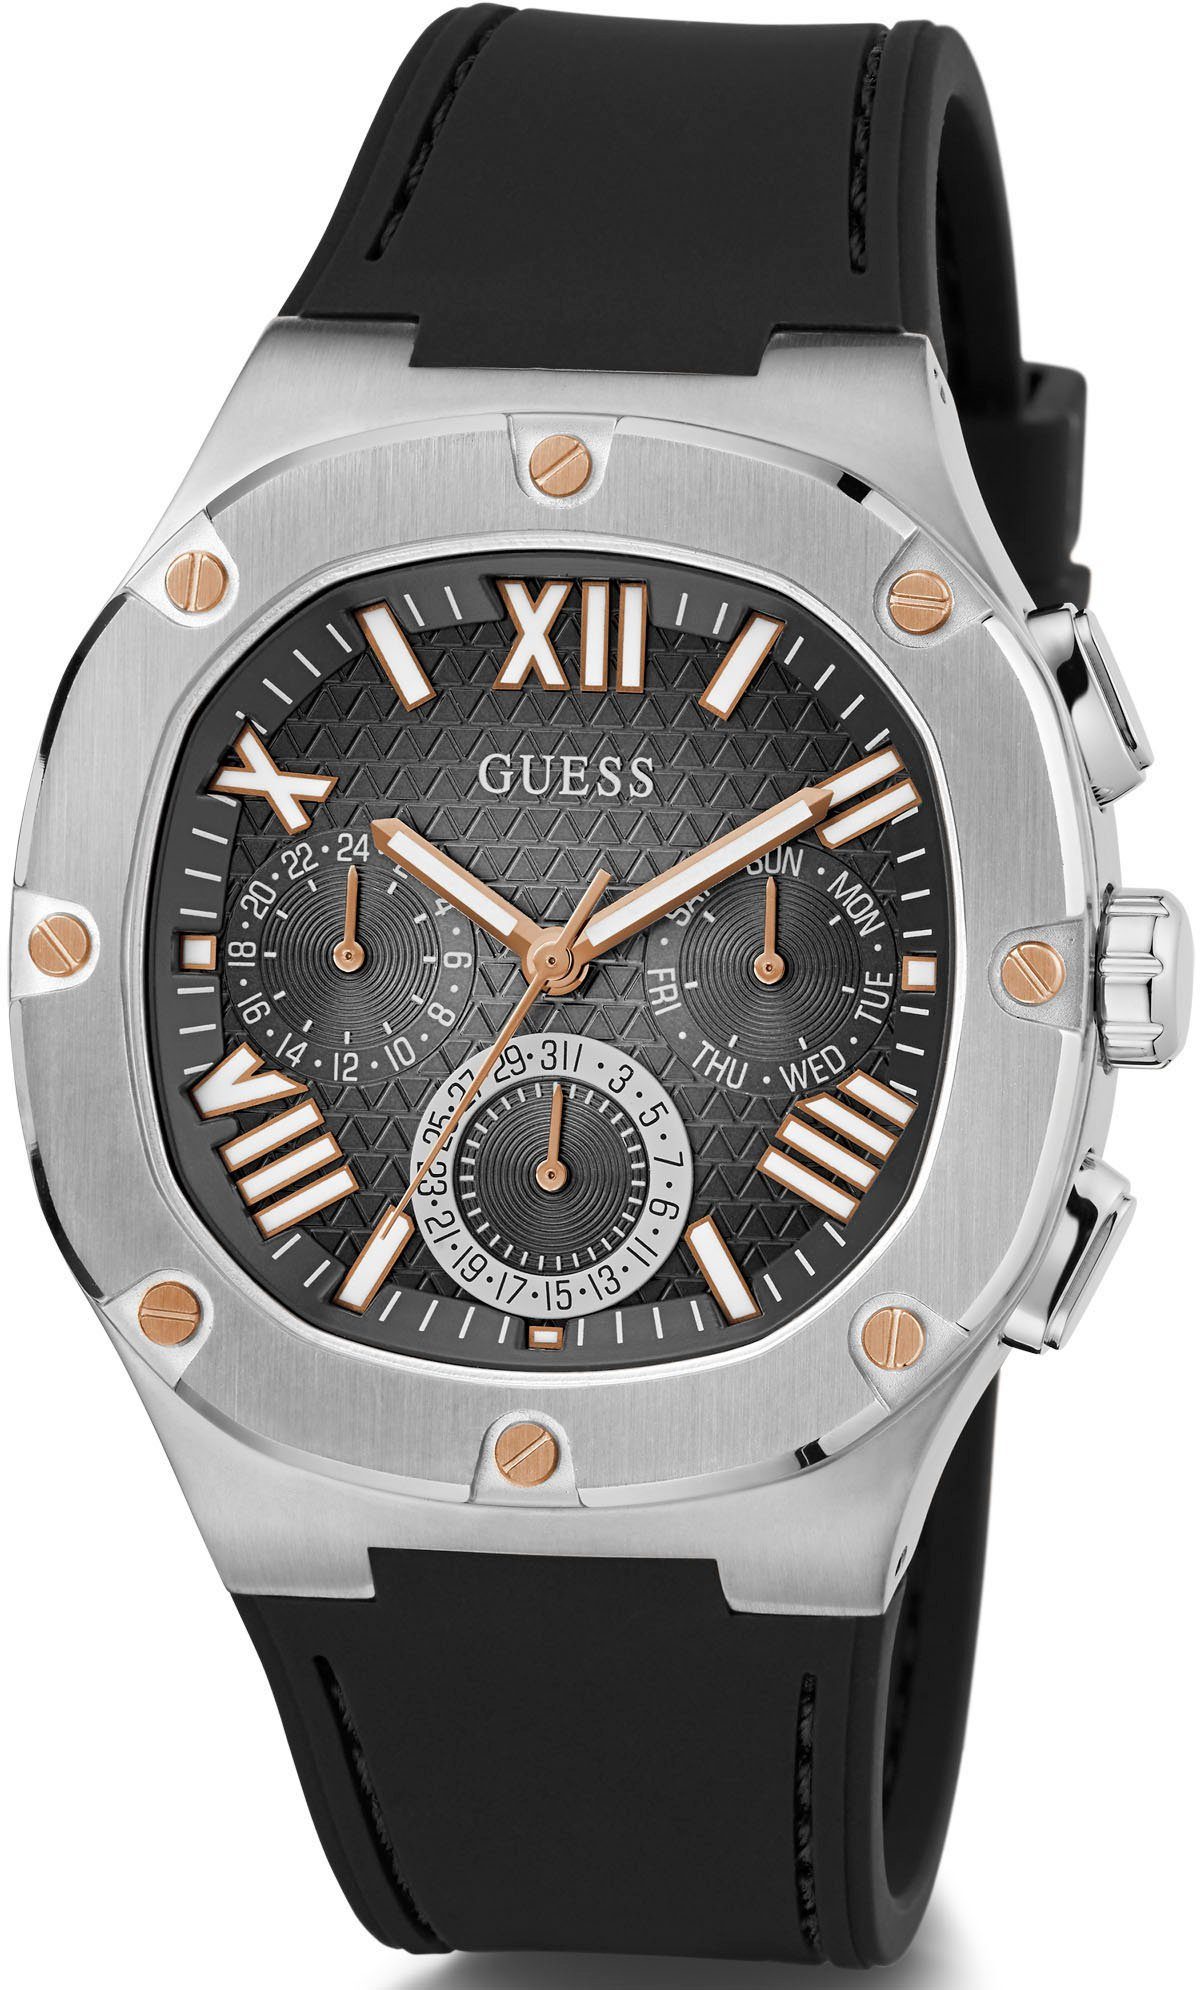 Multifunktionsuhr Guess GW0571G1